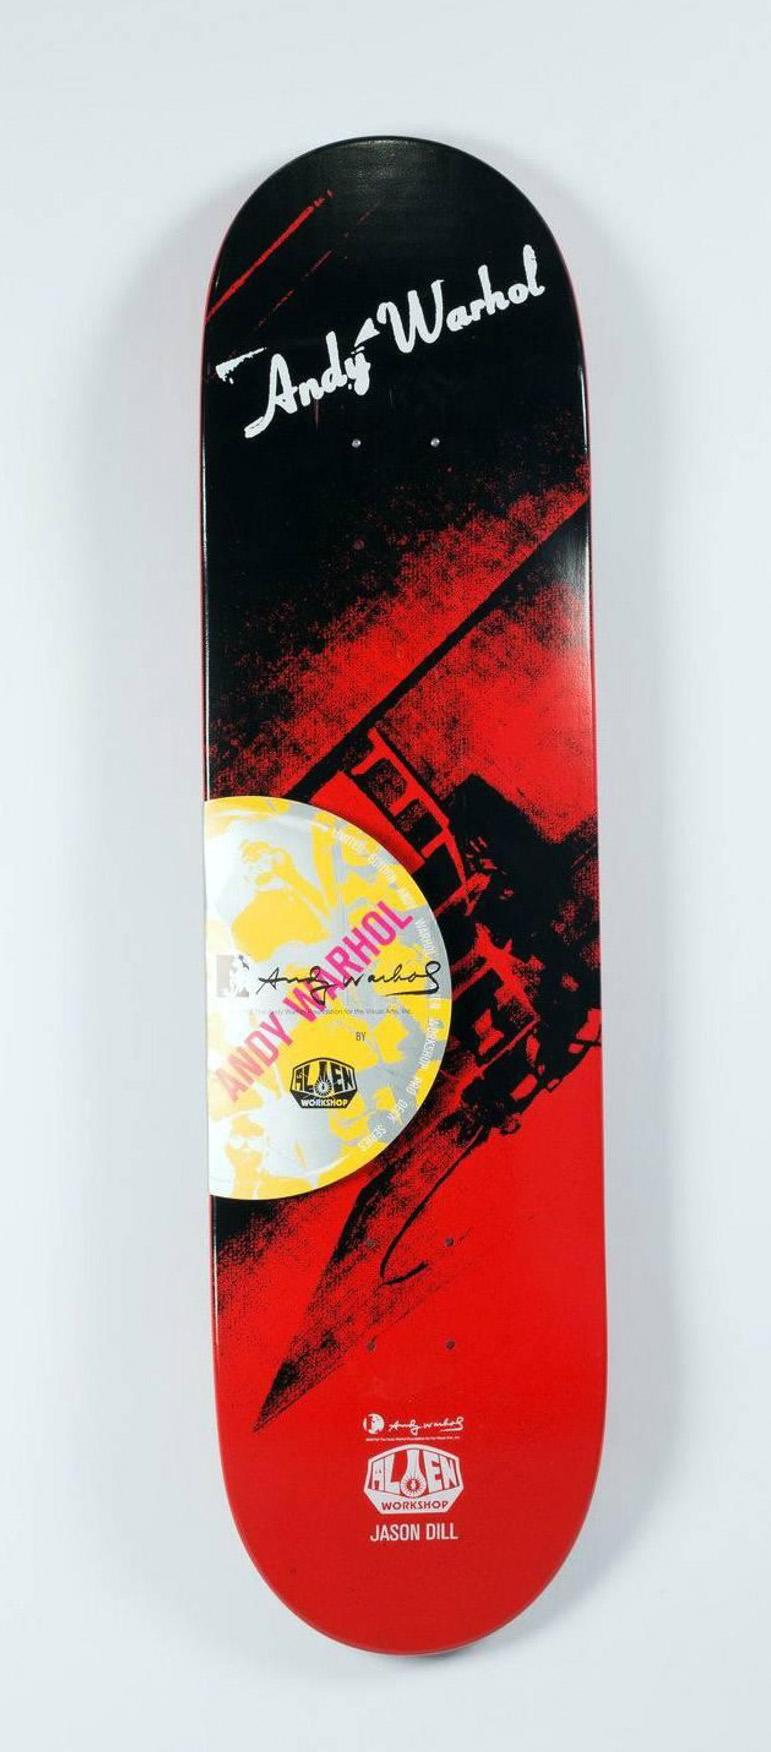 Andy Warhol skateboard deck (Warhol Electric Chair) - Print by (after) Andy Warhol